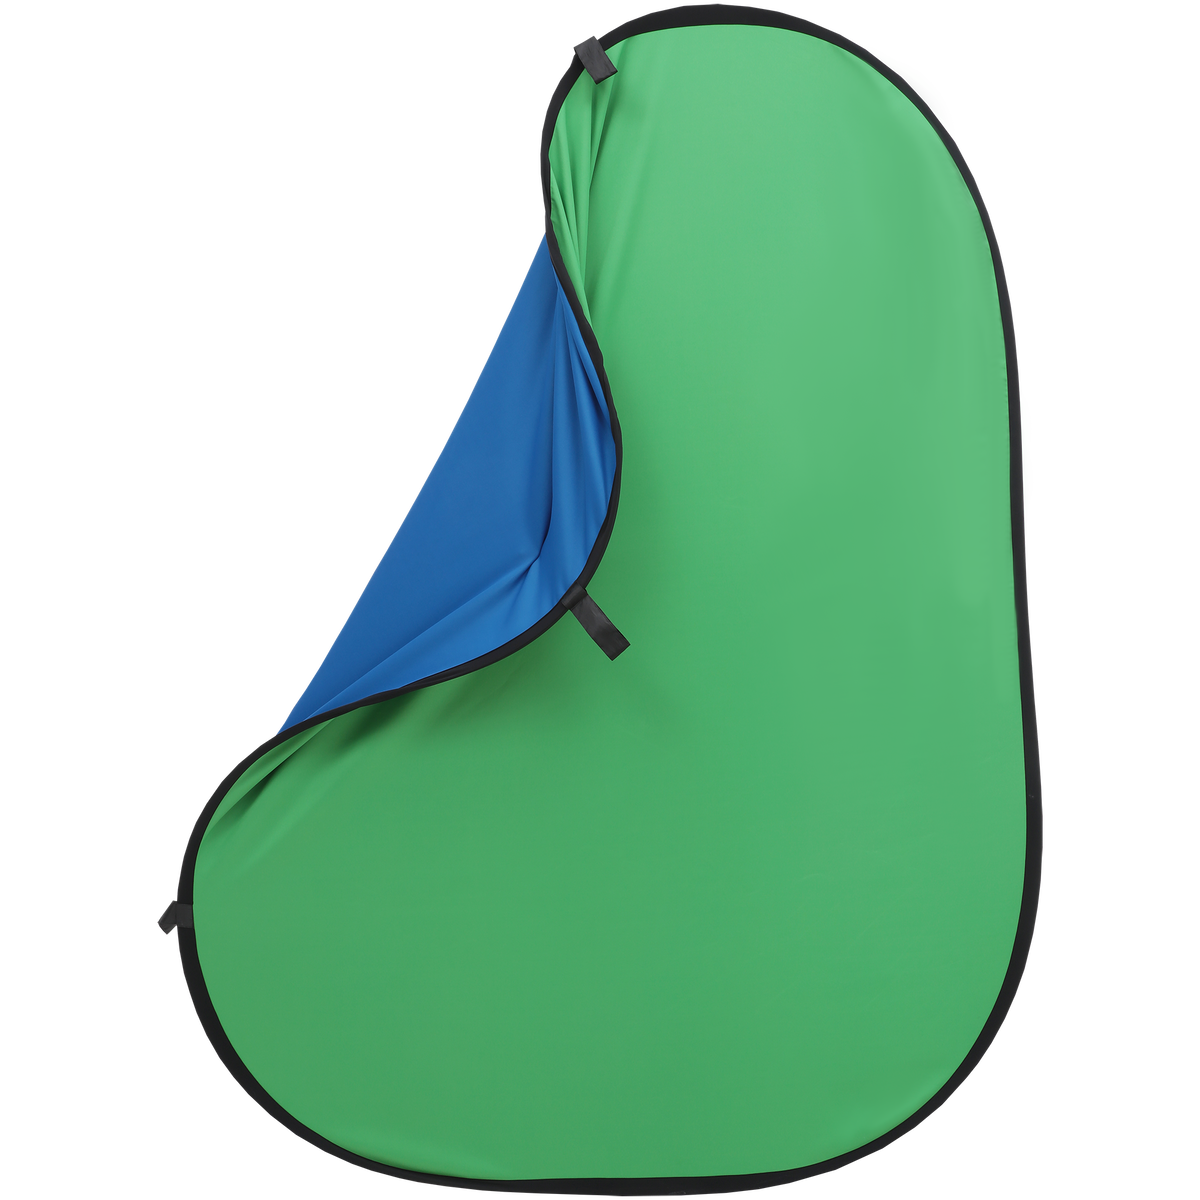 Foldable background in black and white or blue and green